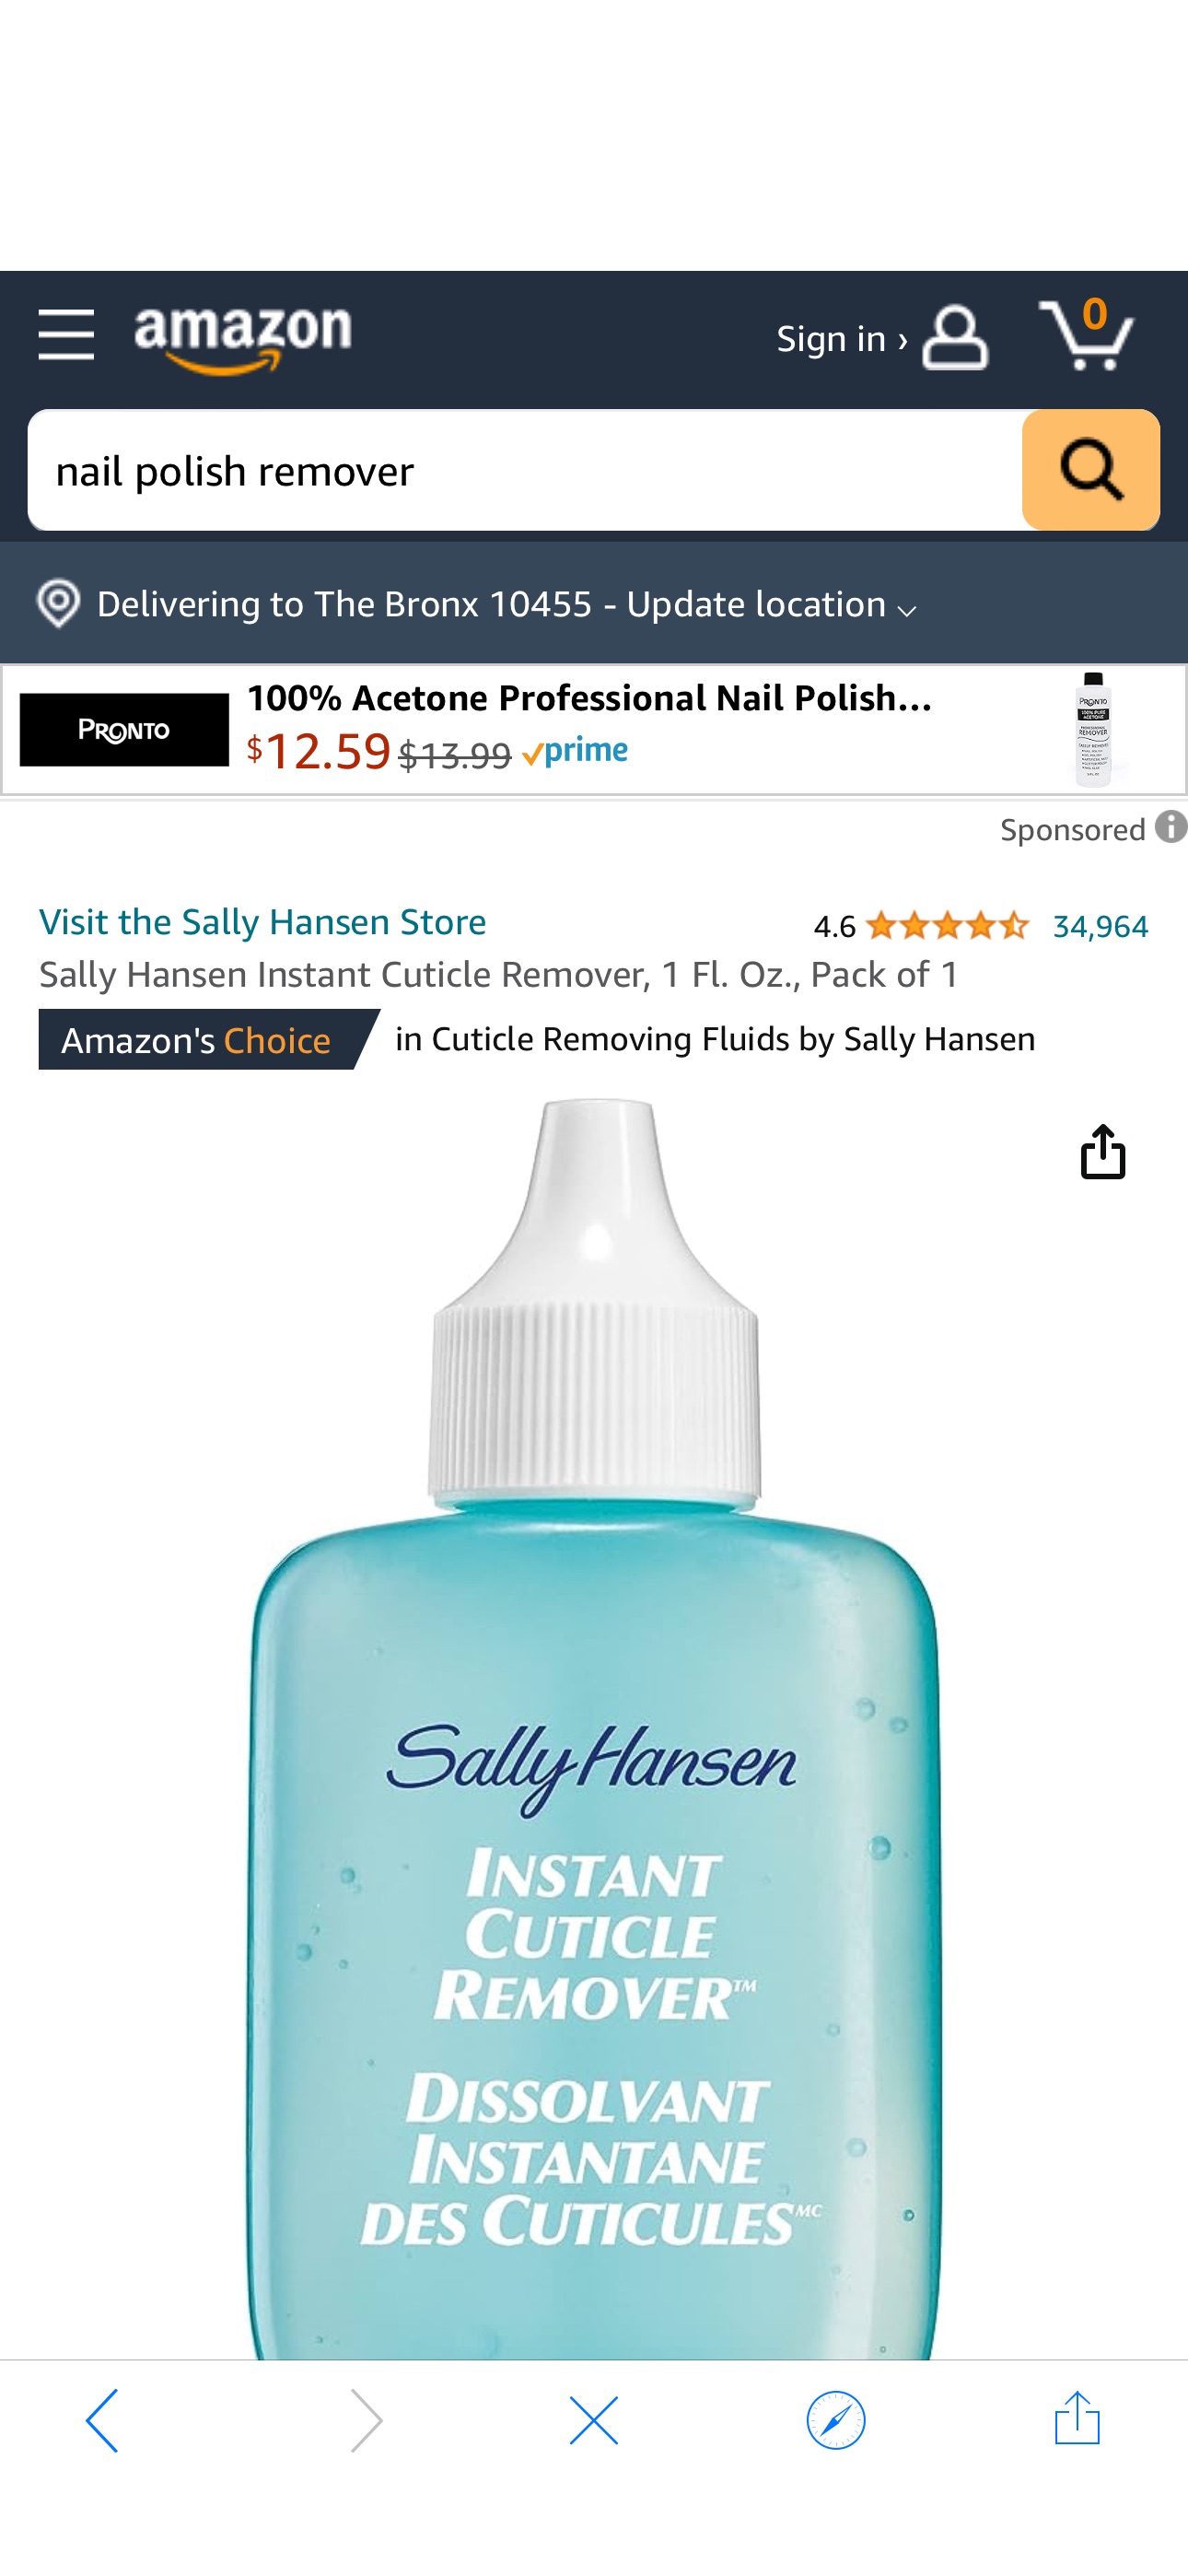 Amazon.com : Sally Hansen Instant Cuticle Remover, 1 Fl. Oz., Pack of 1 : Nail Growth Formula Treatments : Beauty & Personal Care